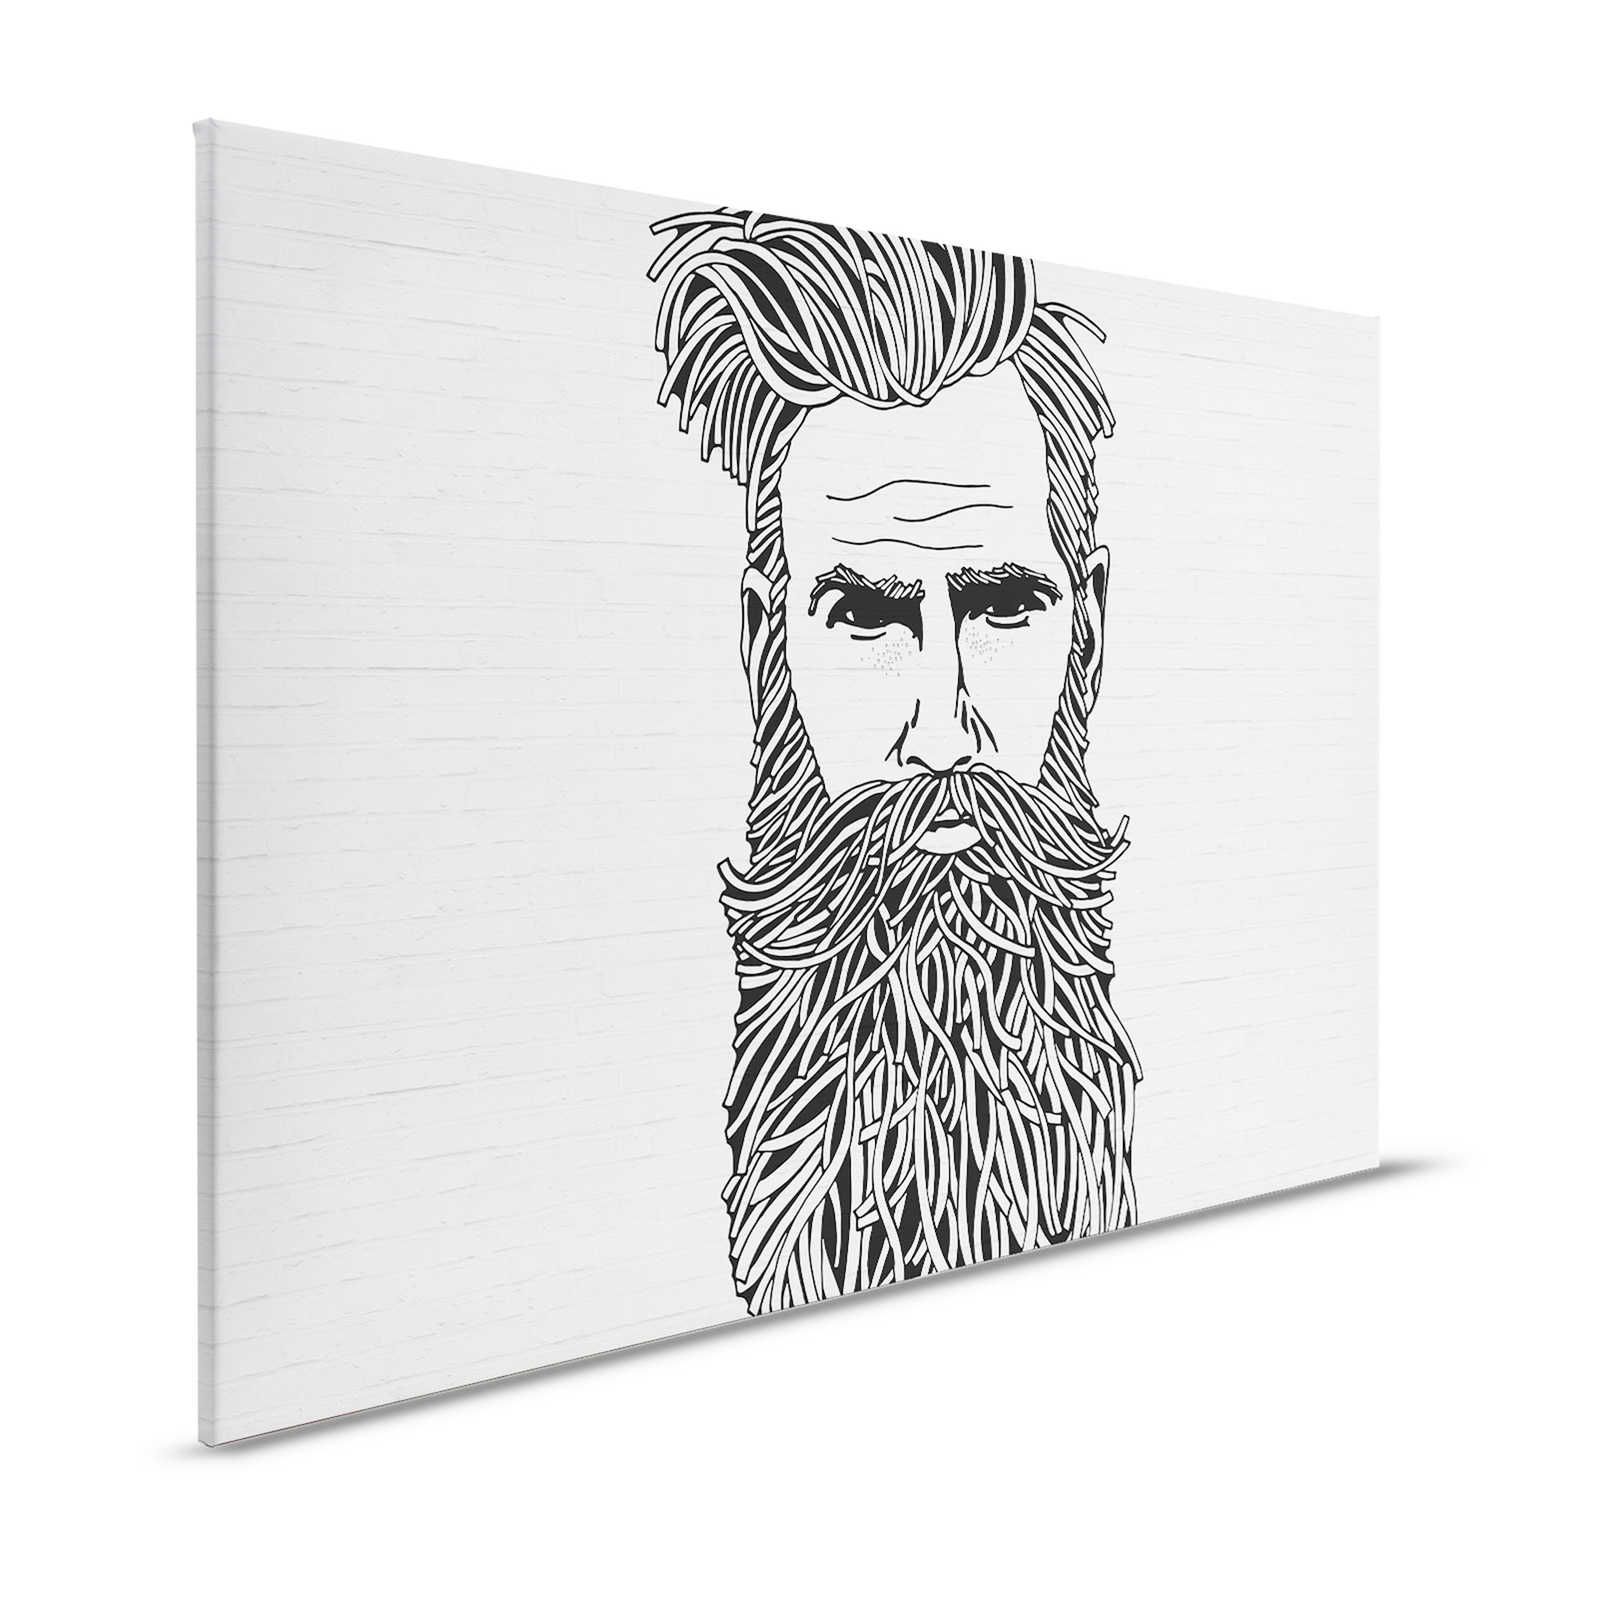 White Canvas Painting Stone Look with Men Portrait in Drawing Style - 1.20 m x 0.80 m
